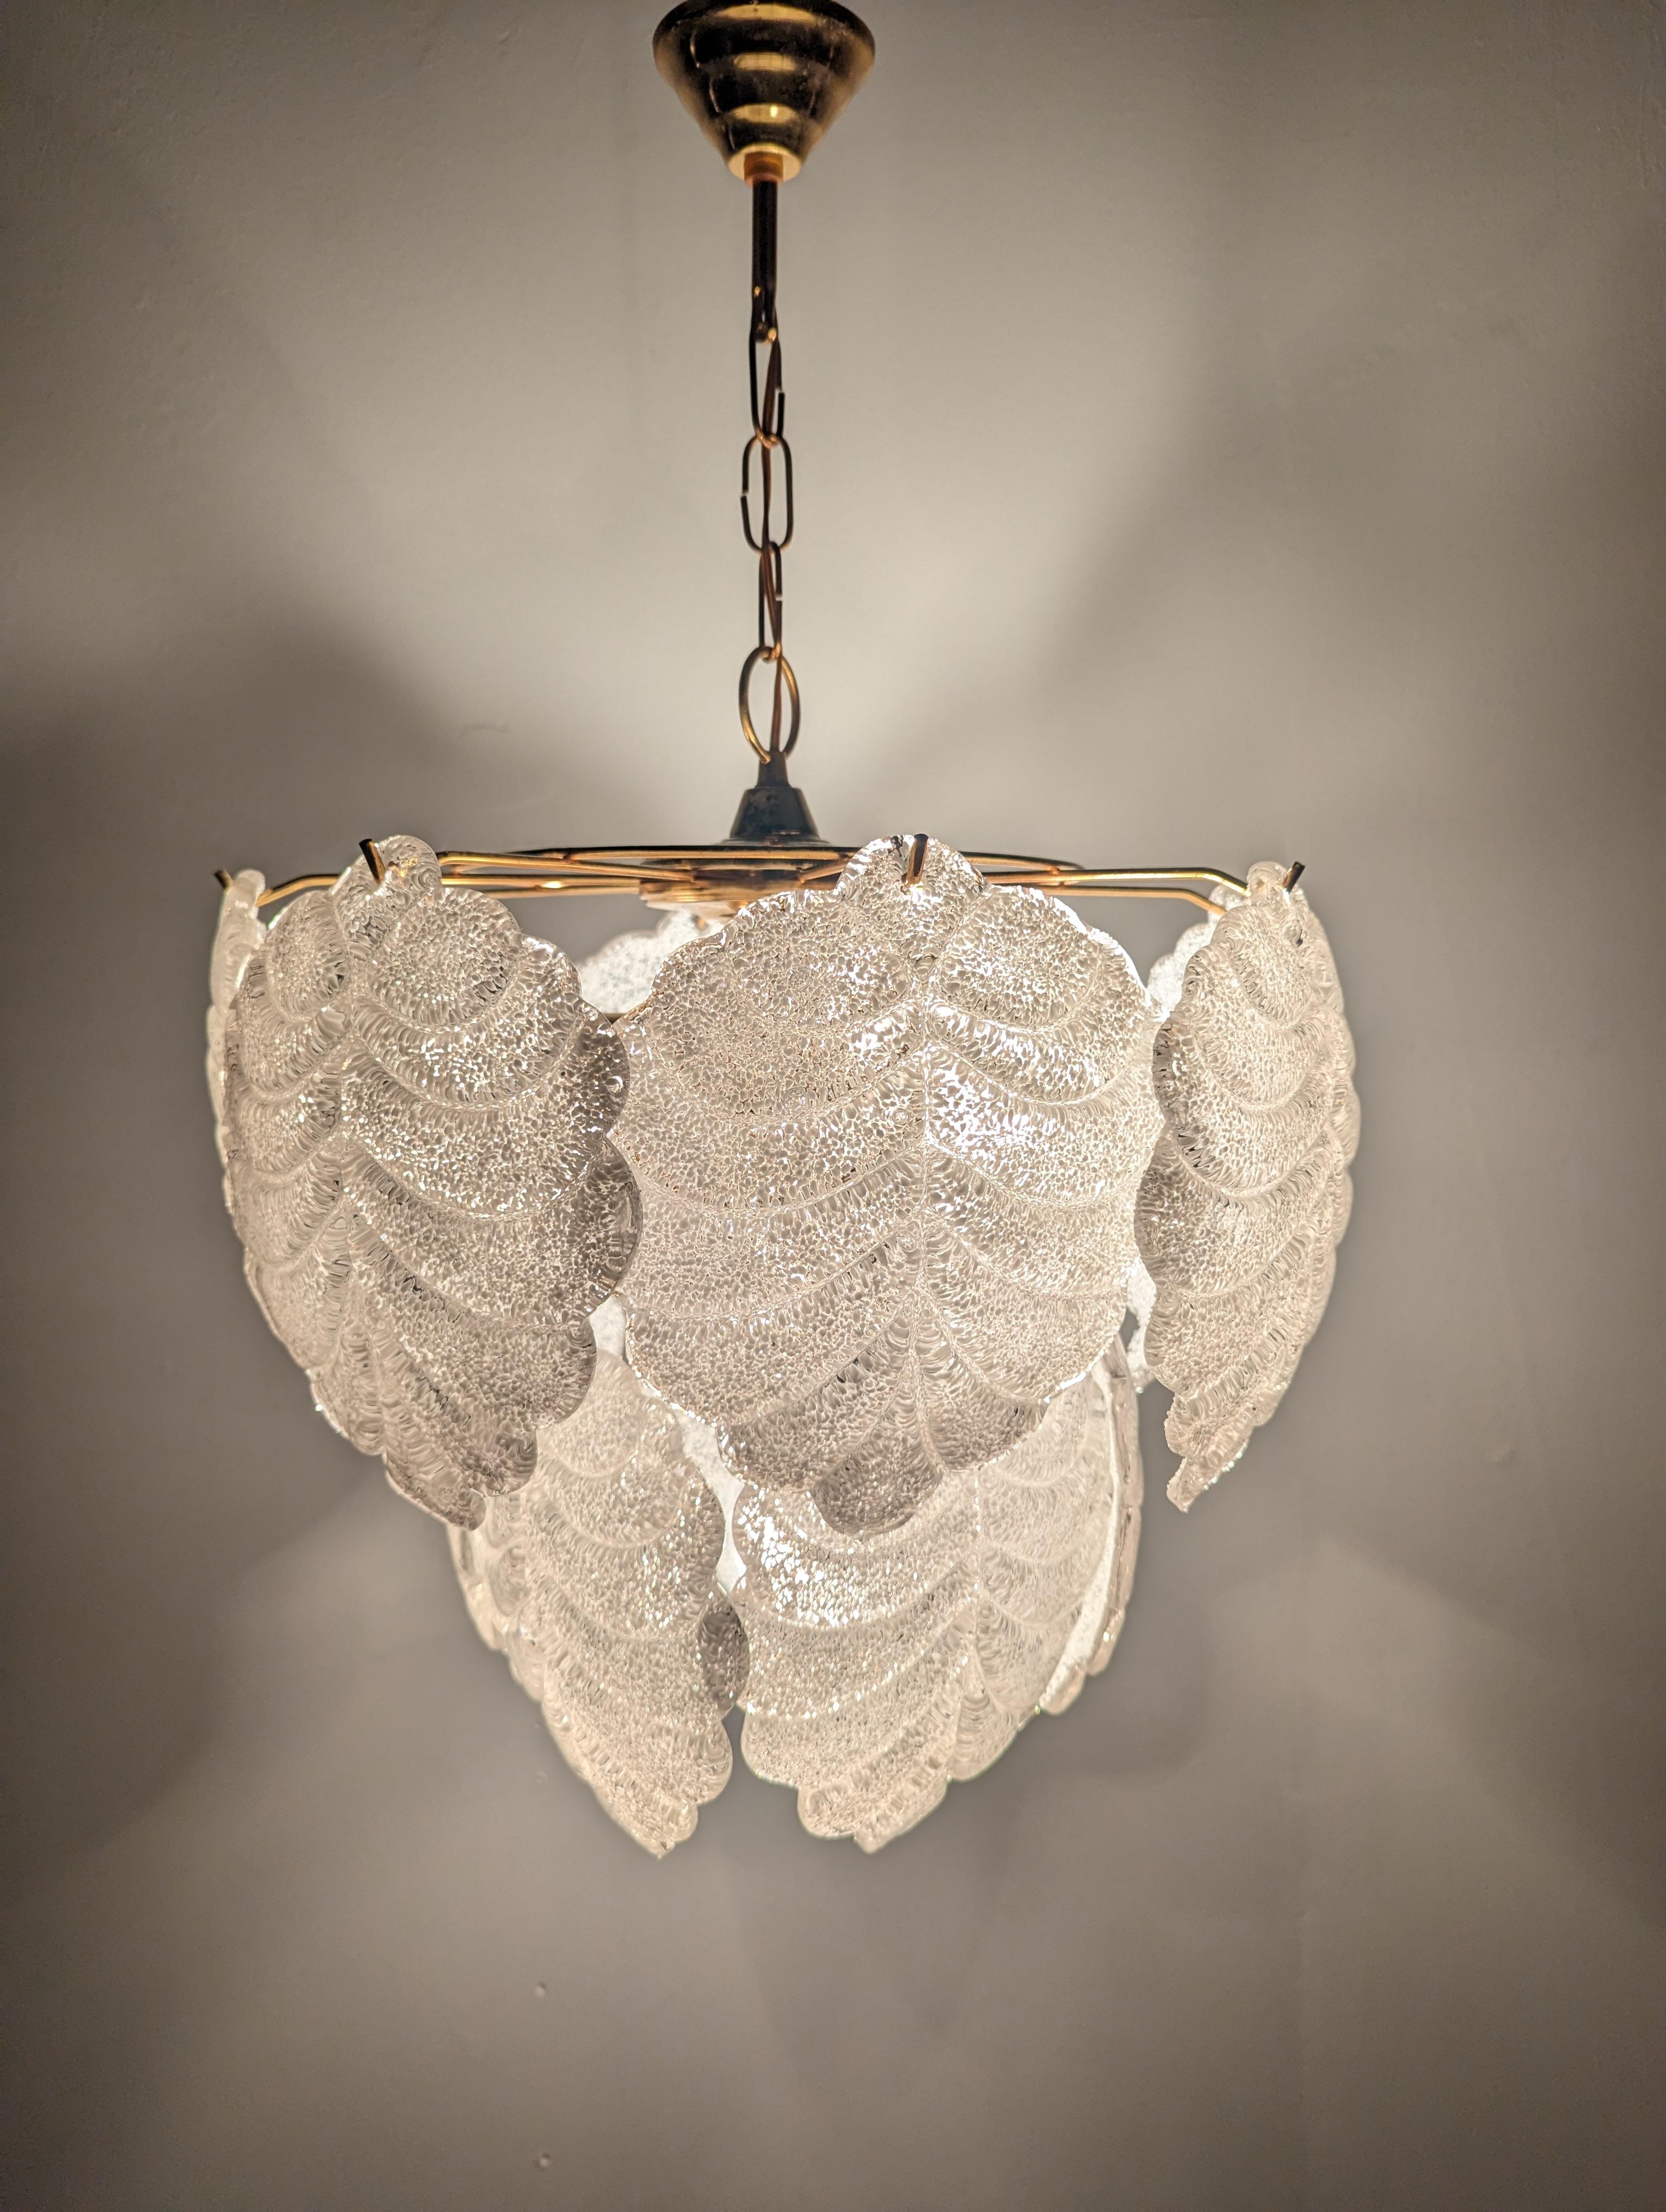 Lamp with large leaves made of Murano glass and white textured inside for elegant and super pleasant lighting.

Total length: 65 cm.